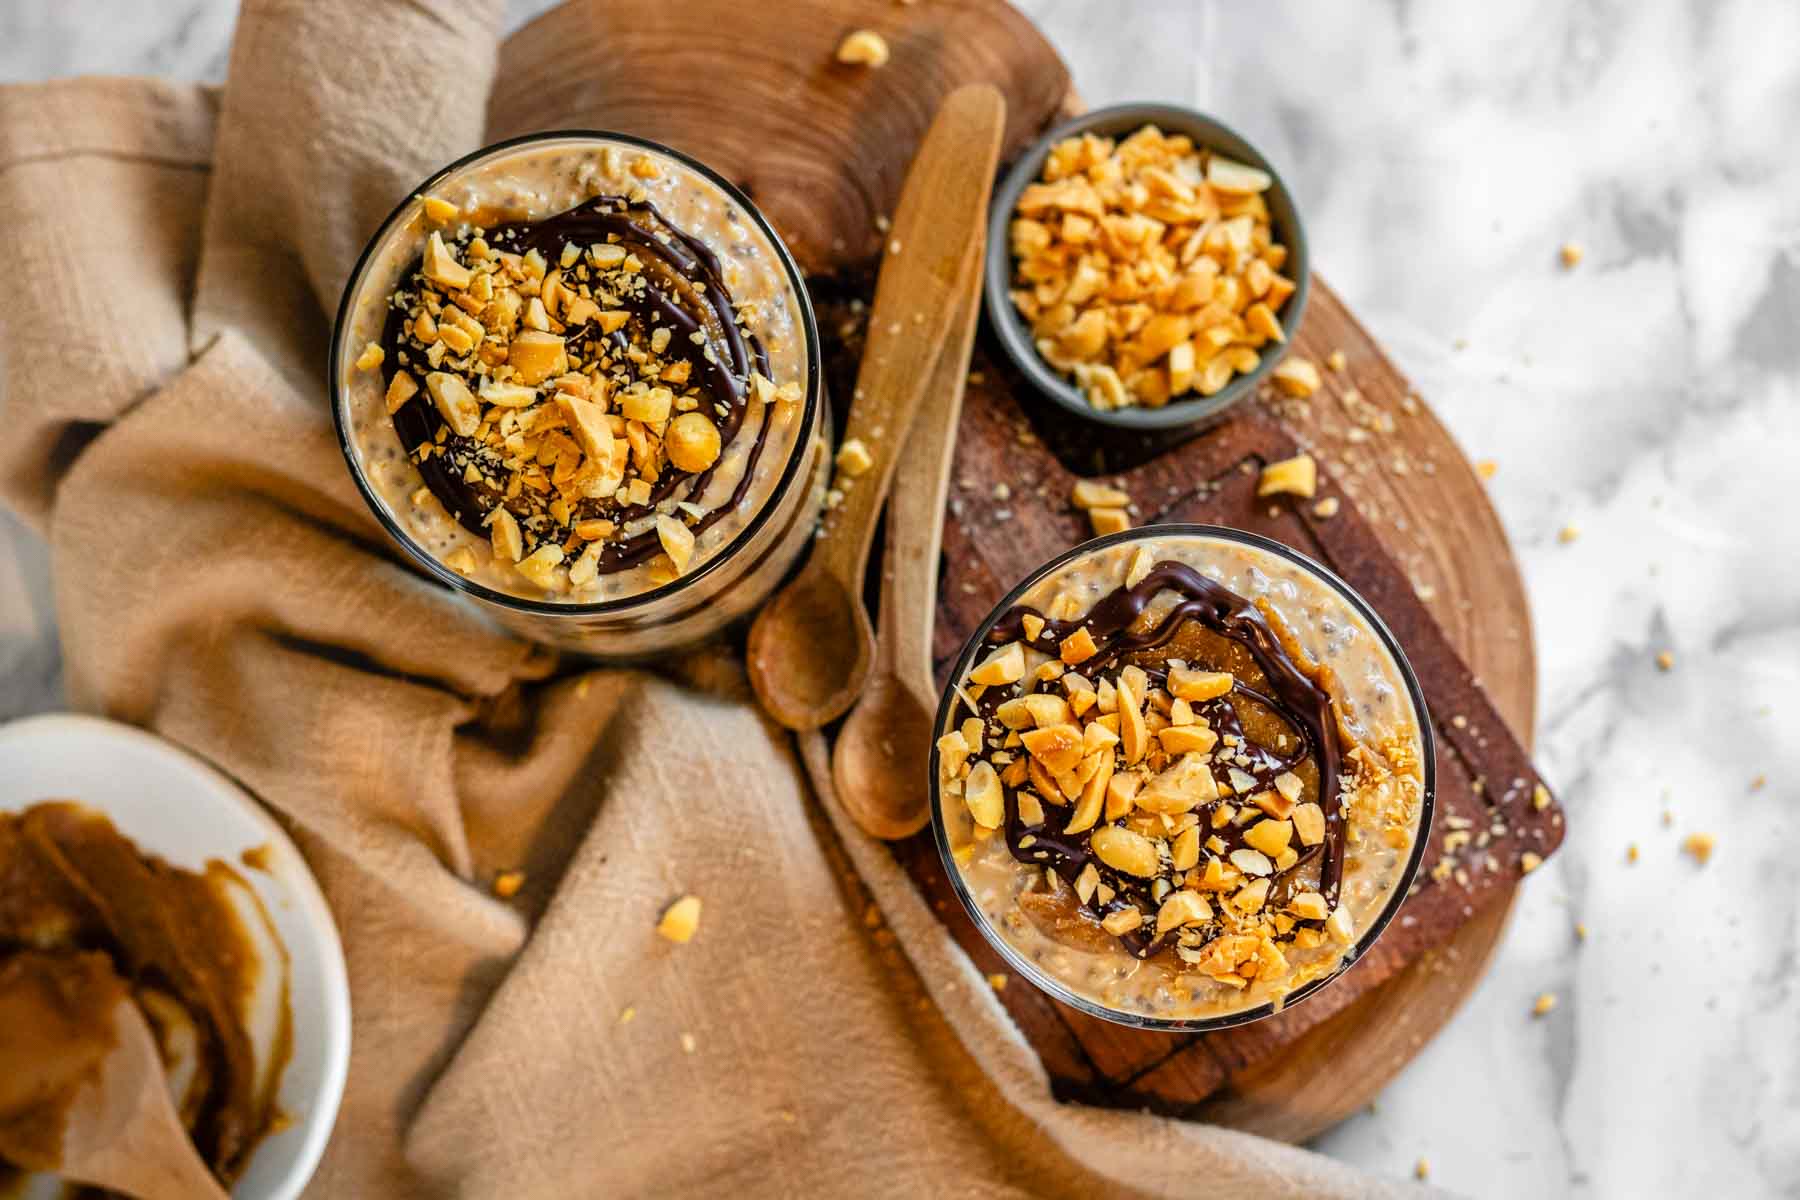 Oats in a glass topped with caramel, chocolate, and peanuts.